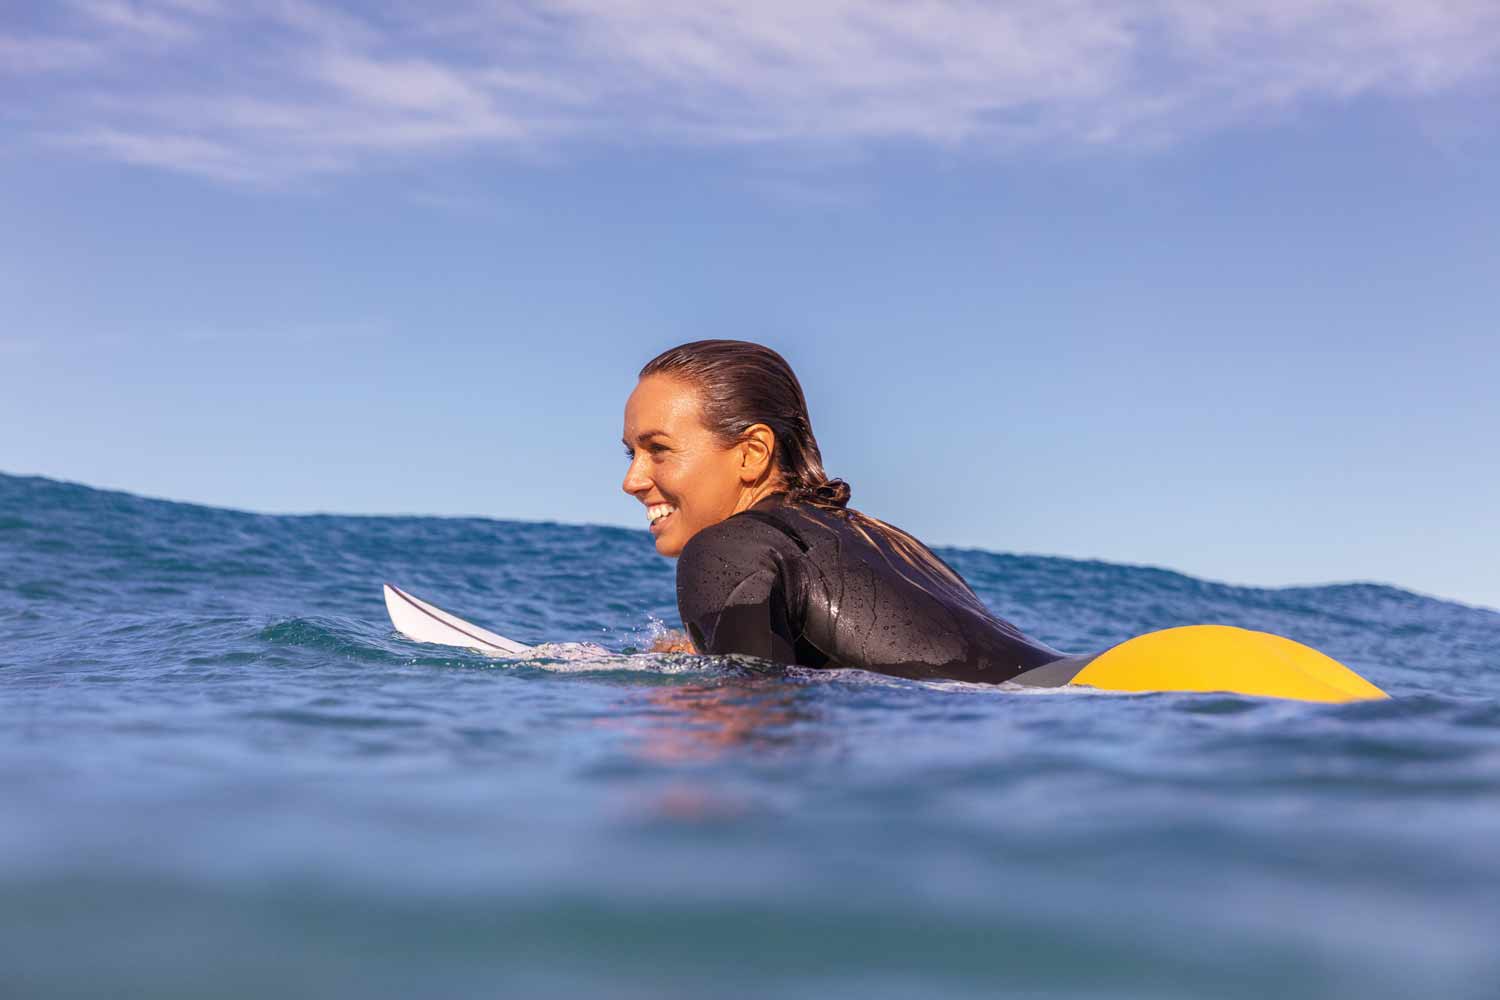 Australia’s Sally Fitzgibbons Is Still Gunning For That Elusive World Title